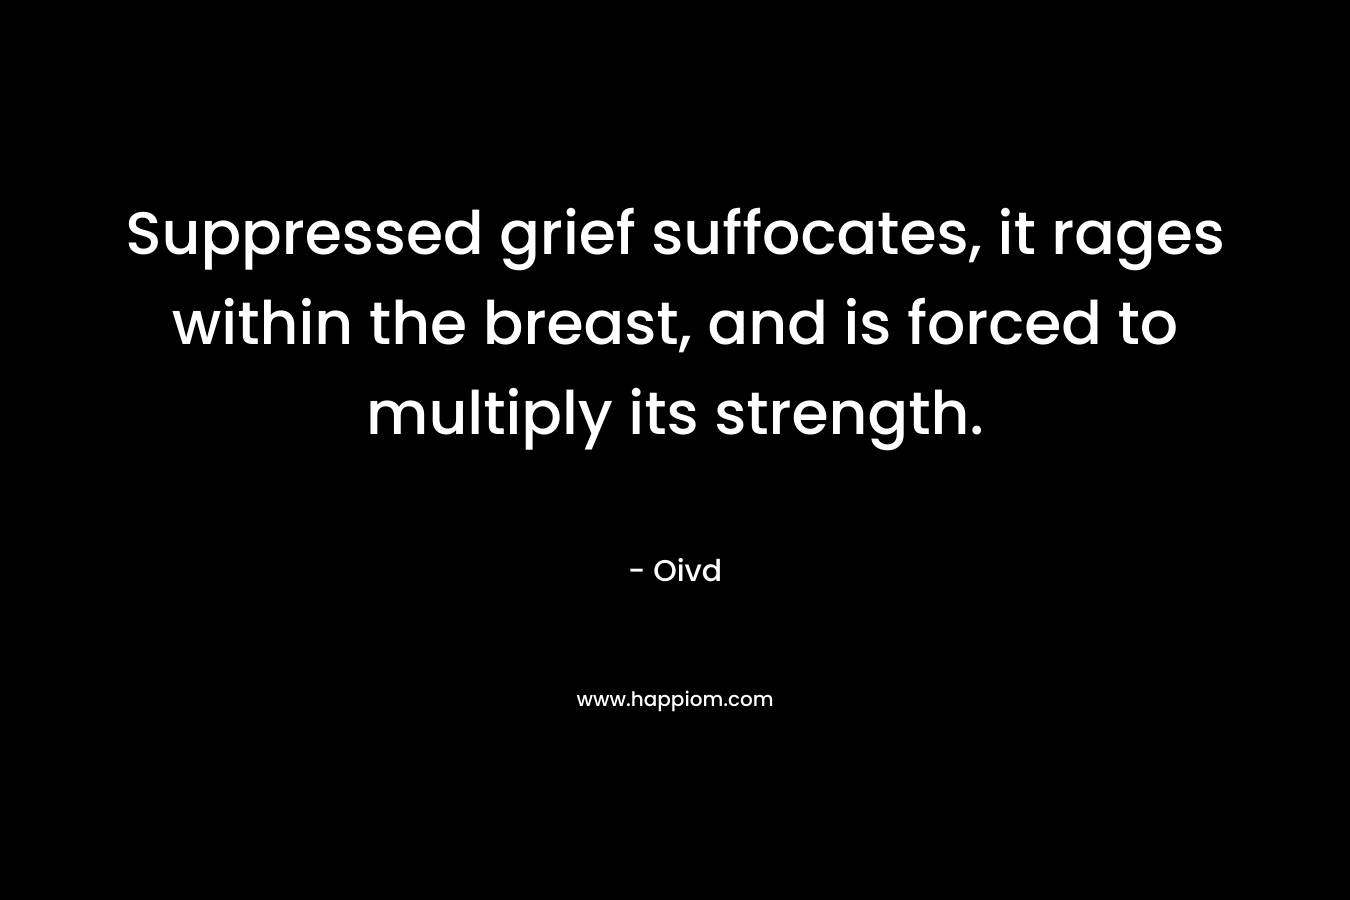 Suppressed grief suffocates, it rages within the breast, and is forced to multiply its strength. – Oivd